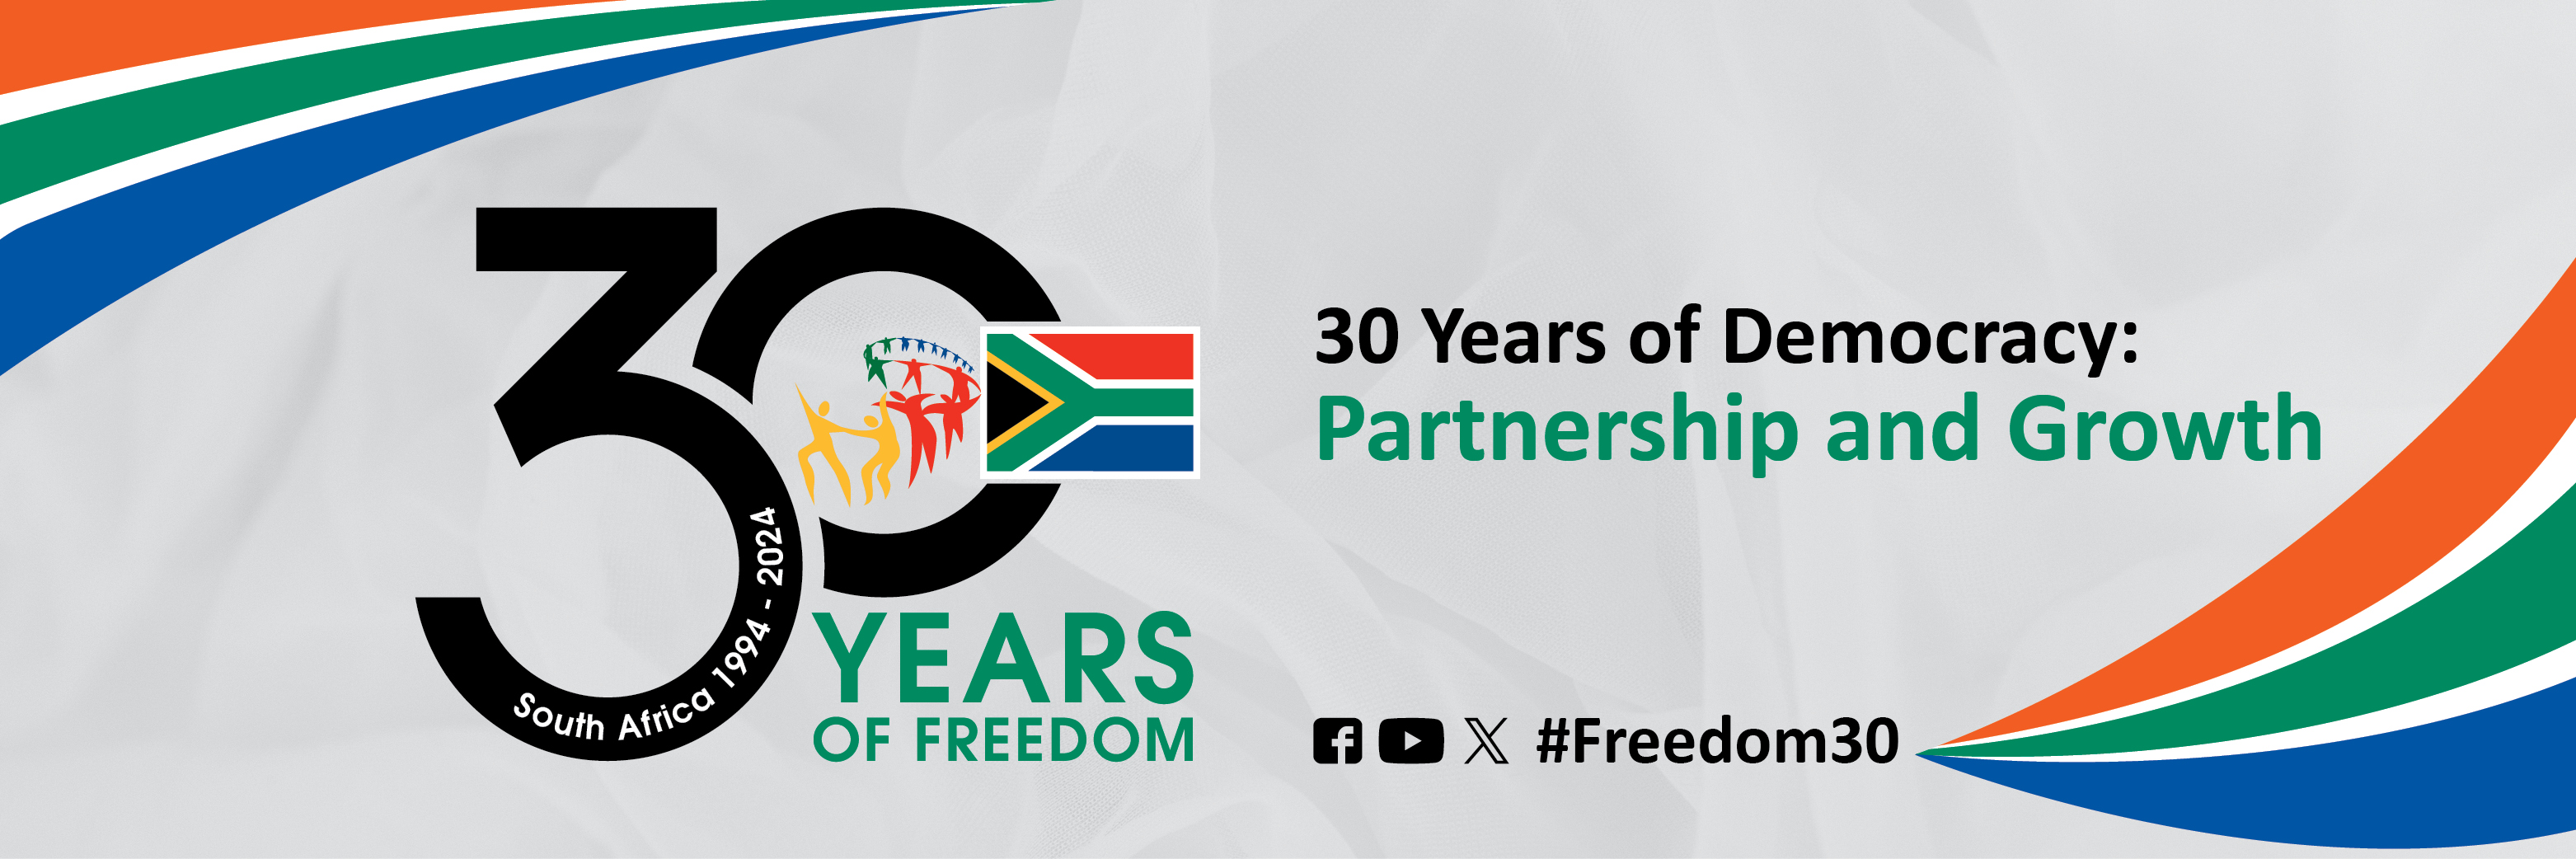 30 Years of Freedom and Democracy